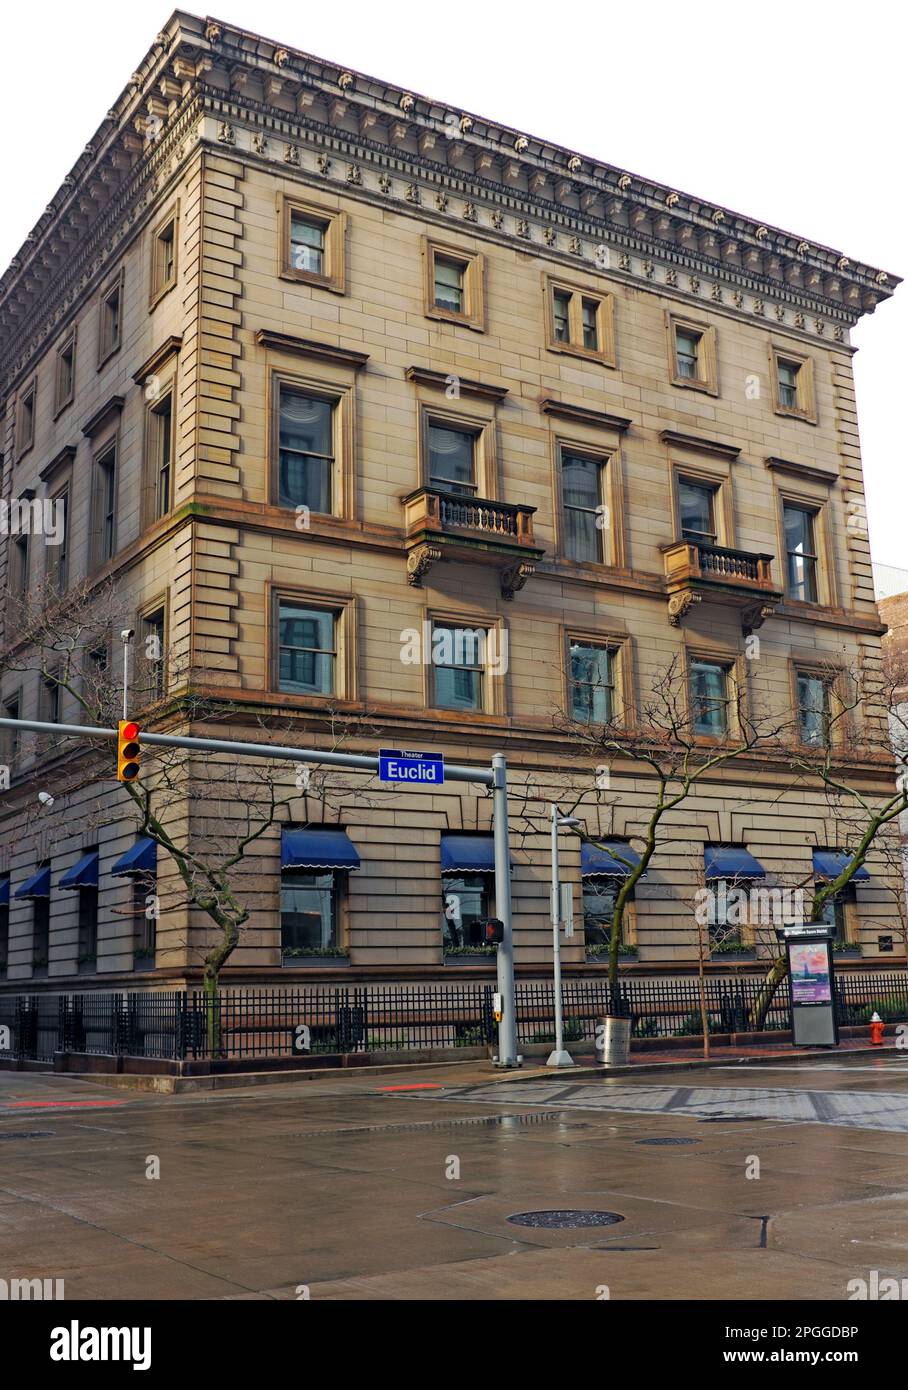 The Cleveland Union Club, a private social club incorporated in 1872, at the corner of Euclid and East 12th in downtown Cleveland, Ohio, USA. Stock Photo